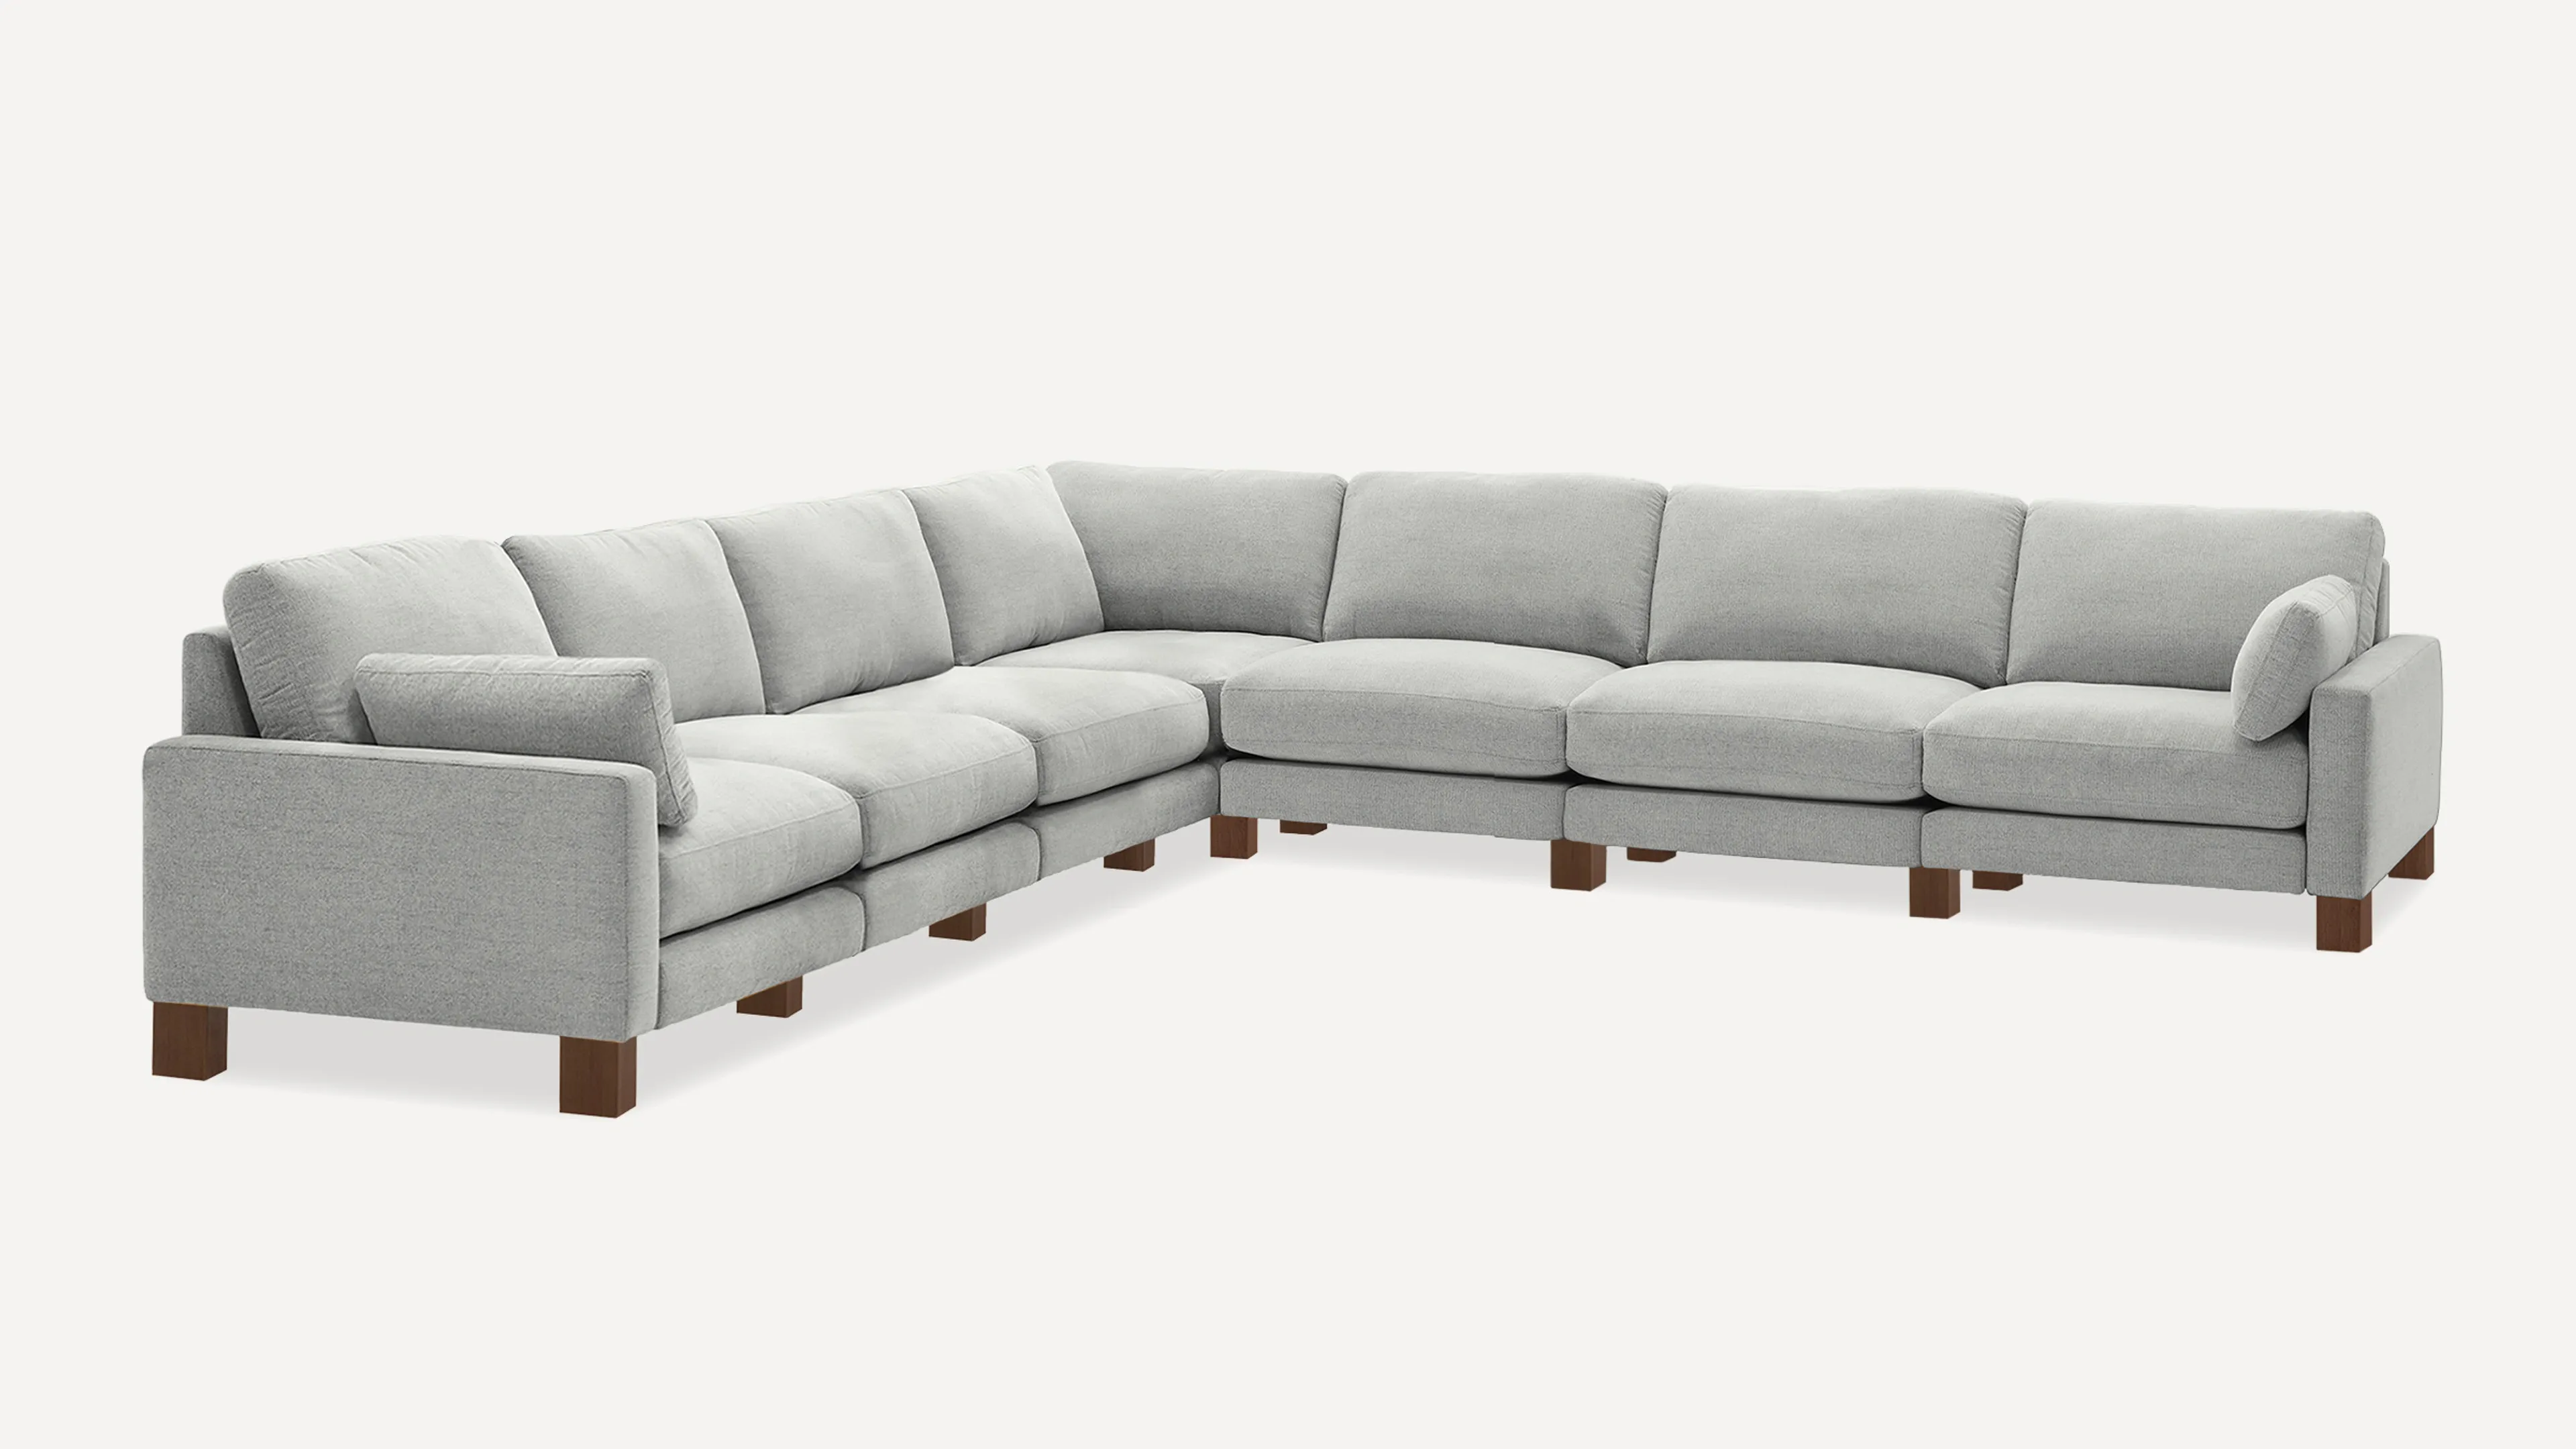 Union 7-Seat Sectional